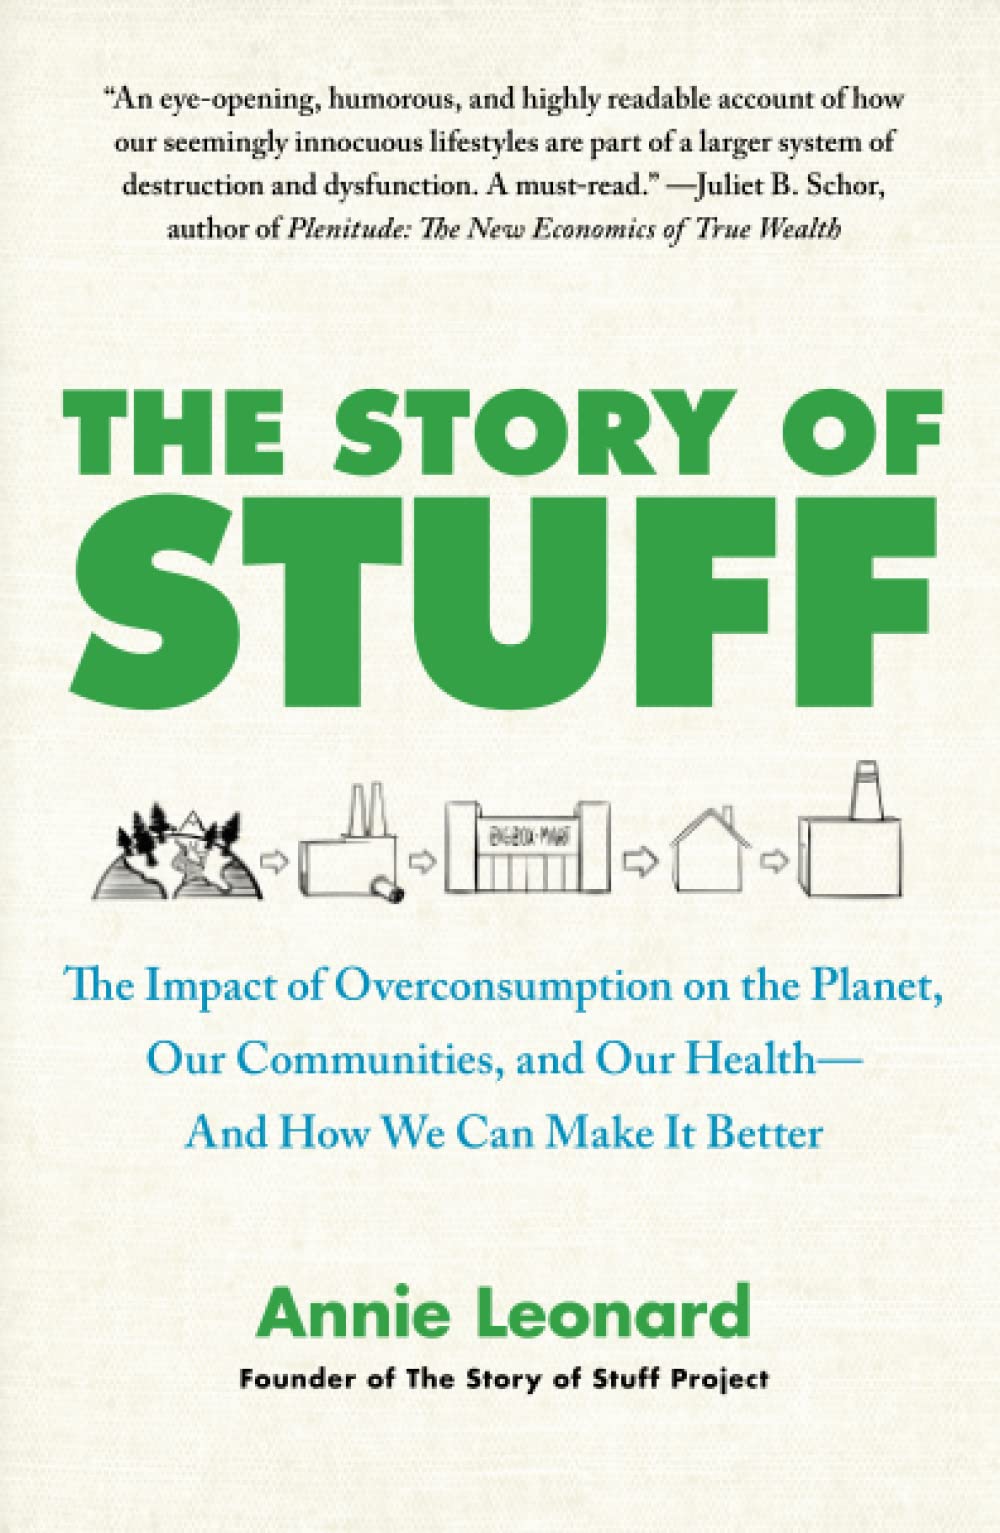 The Story of Stuff (The Impact of Overconsumption on the Planet, Our Communities, and Our Health- and How We can Make it Better)